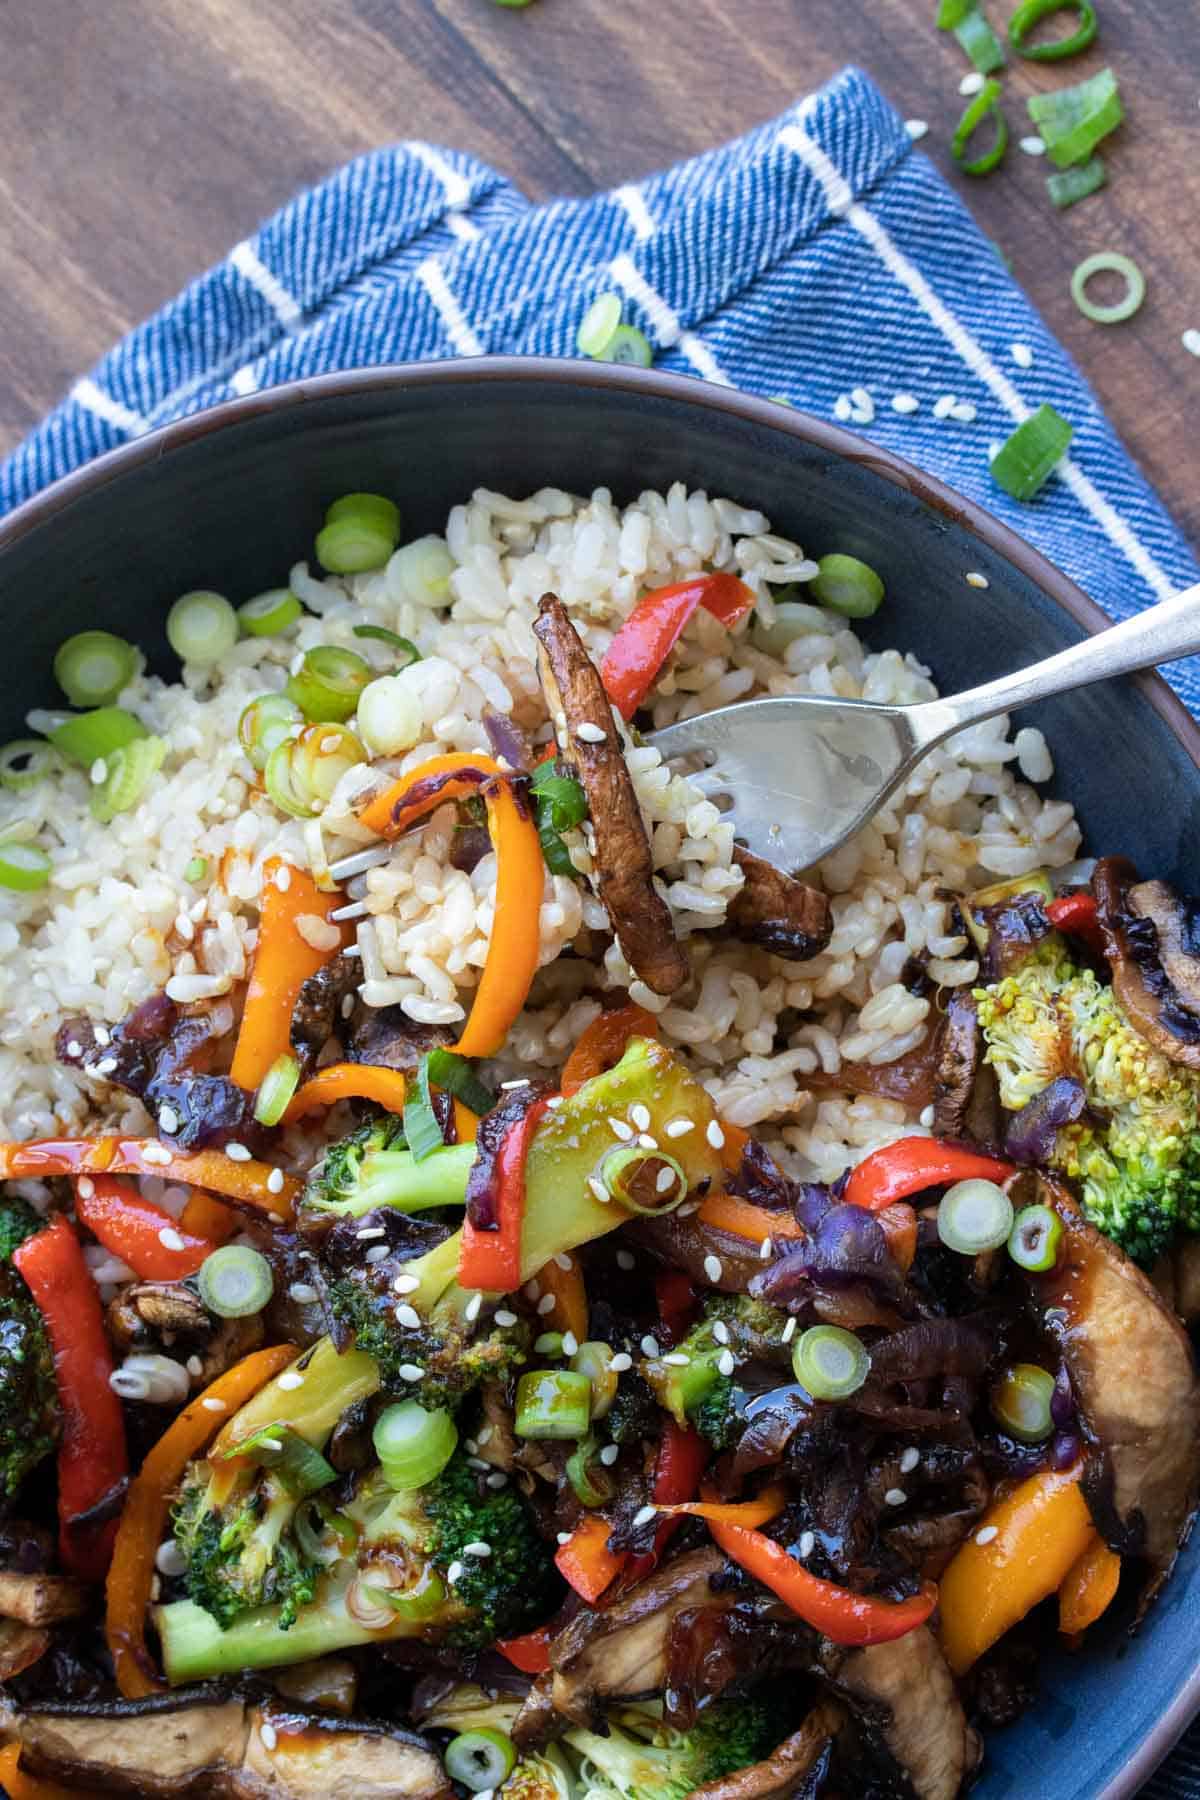 Fork getting a bite of teriyaki stir fried veggies over rice in a black bowl on a blue striped towel.